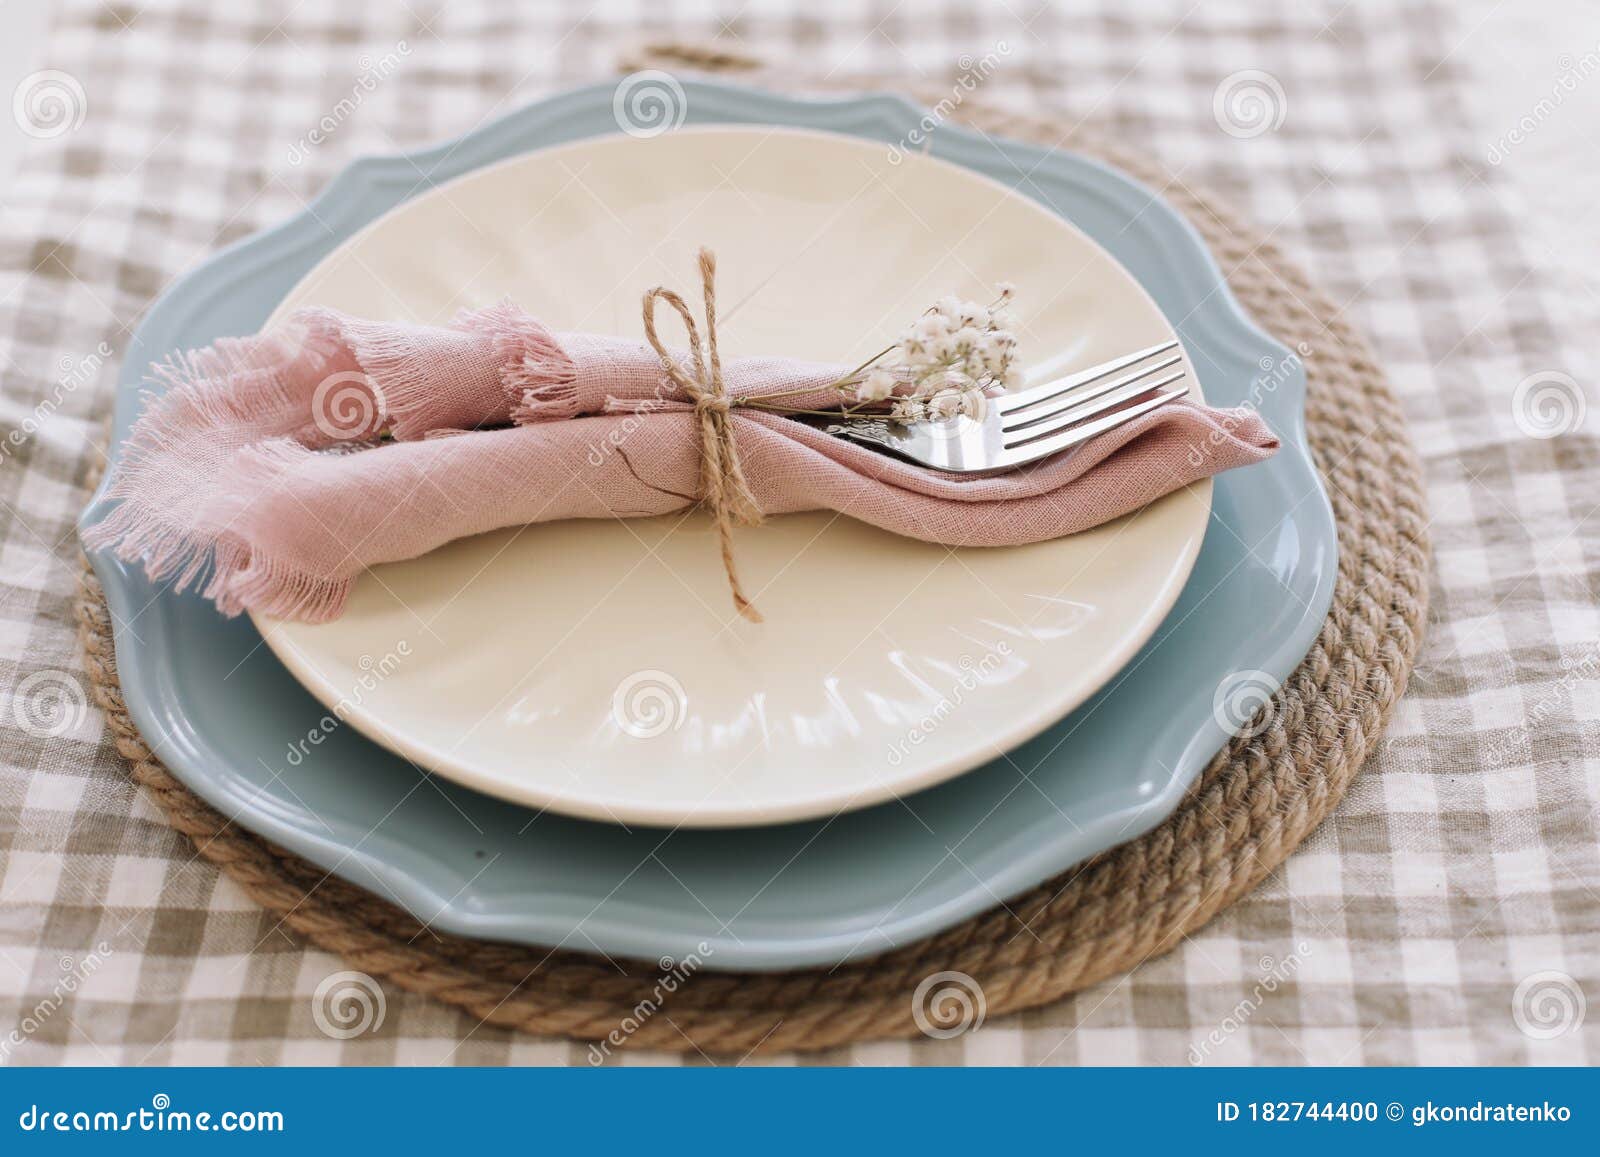 https://thumbs.dreamstime.com/z/elegant-table-setting-top-view-table-set-fine-dining-cutlery-metal-fork-linen-napkins-beautiful-plate-home-decor-182744400.jpg